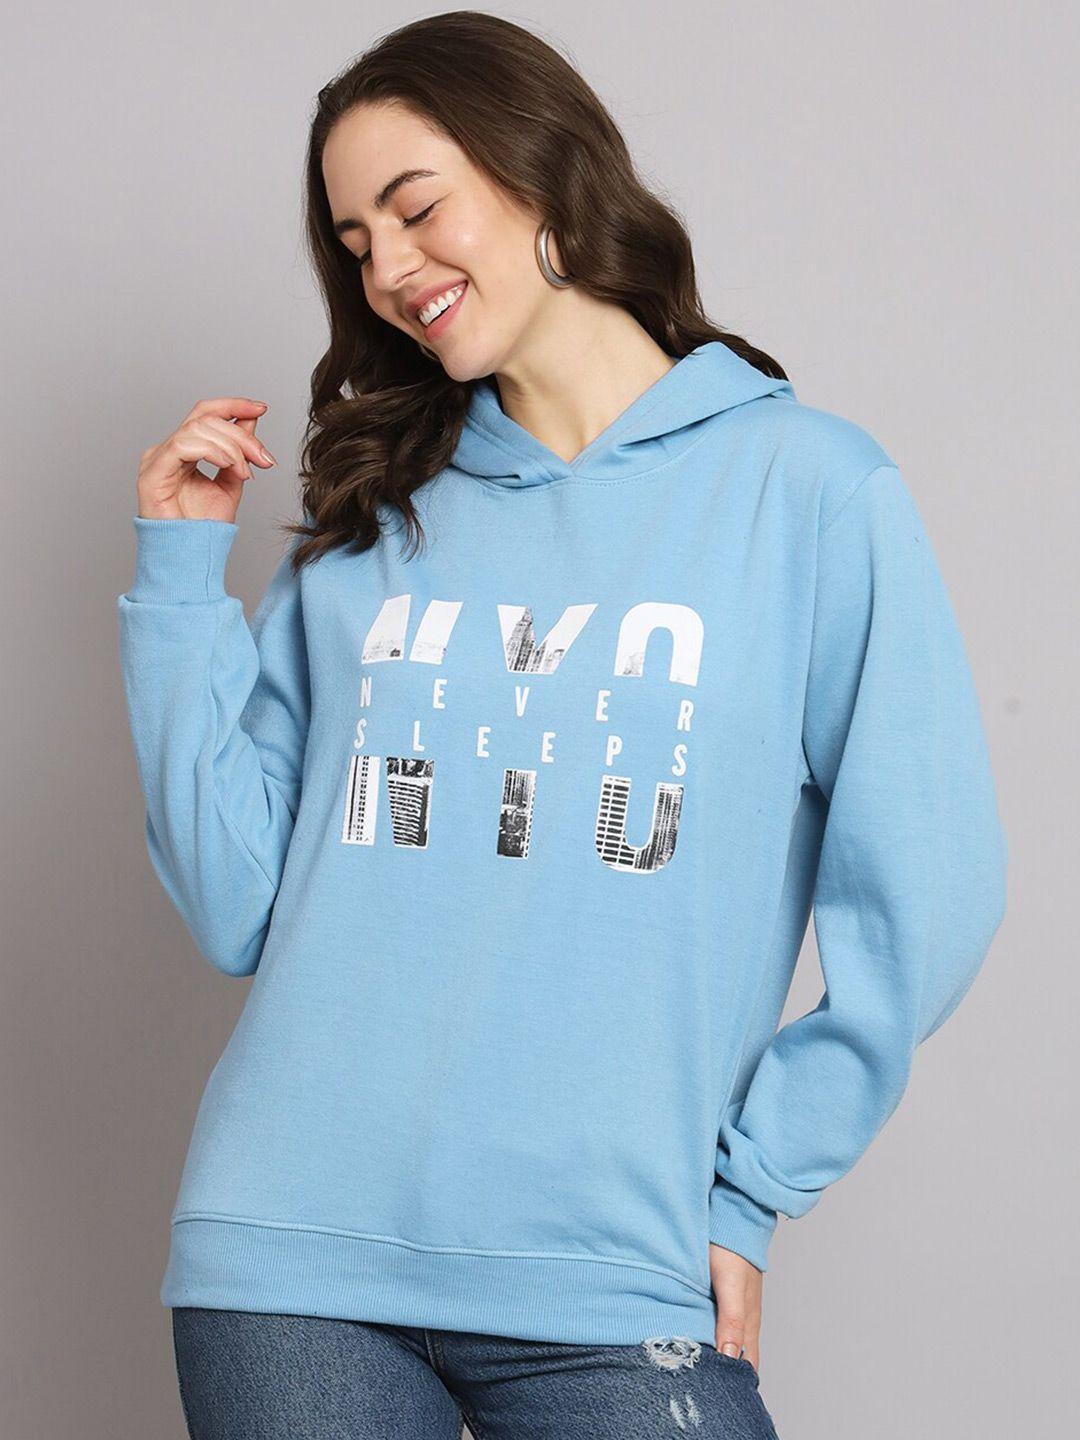 obaan typography printed hooded cotton pullover